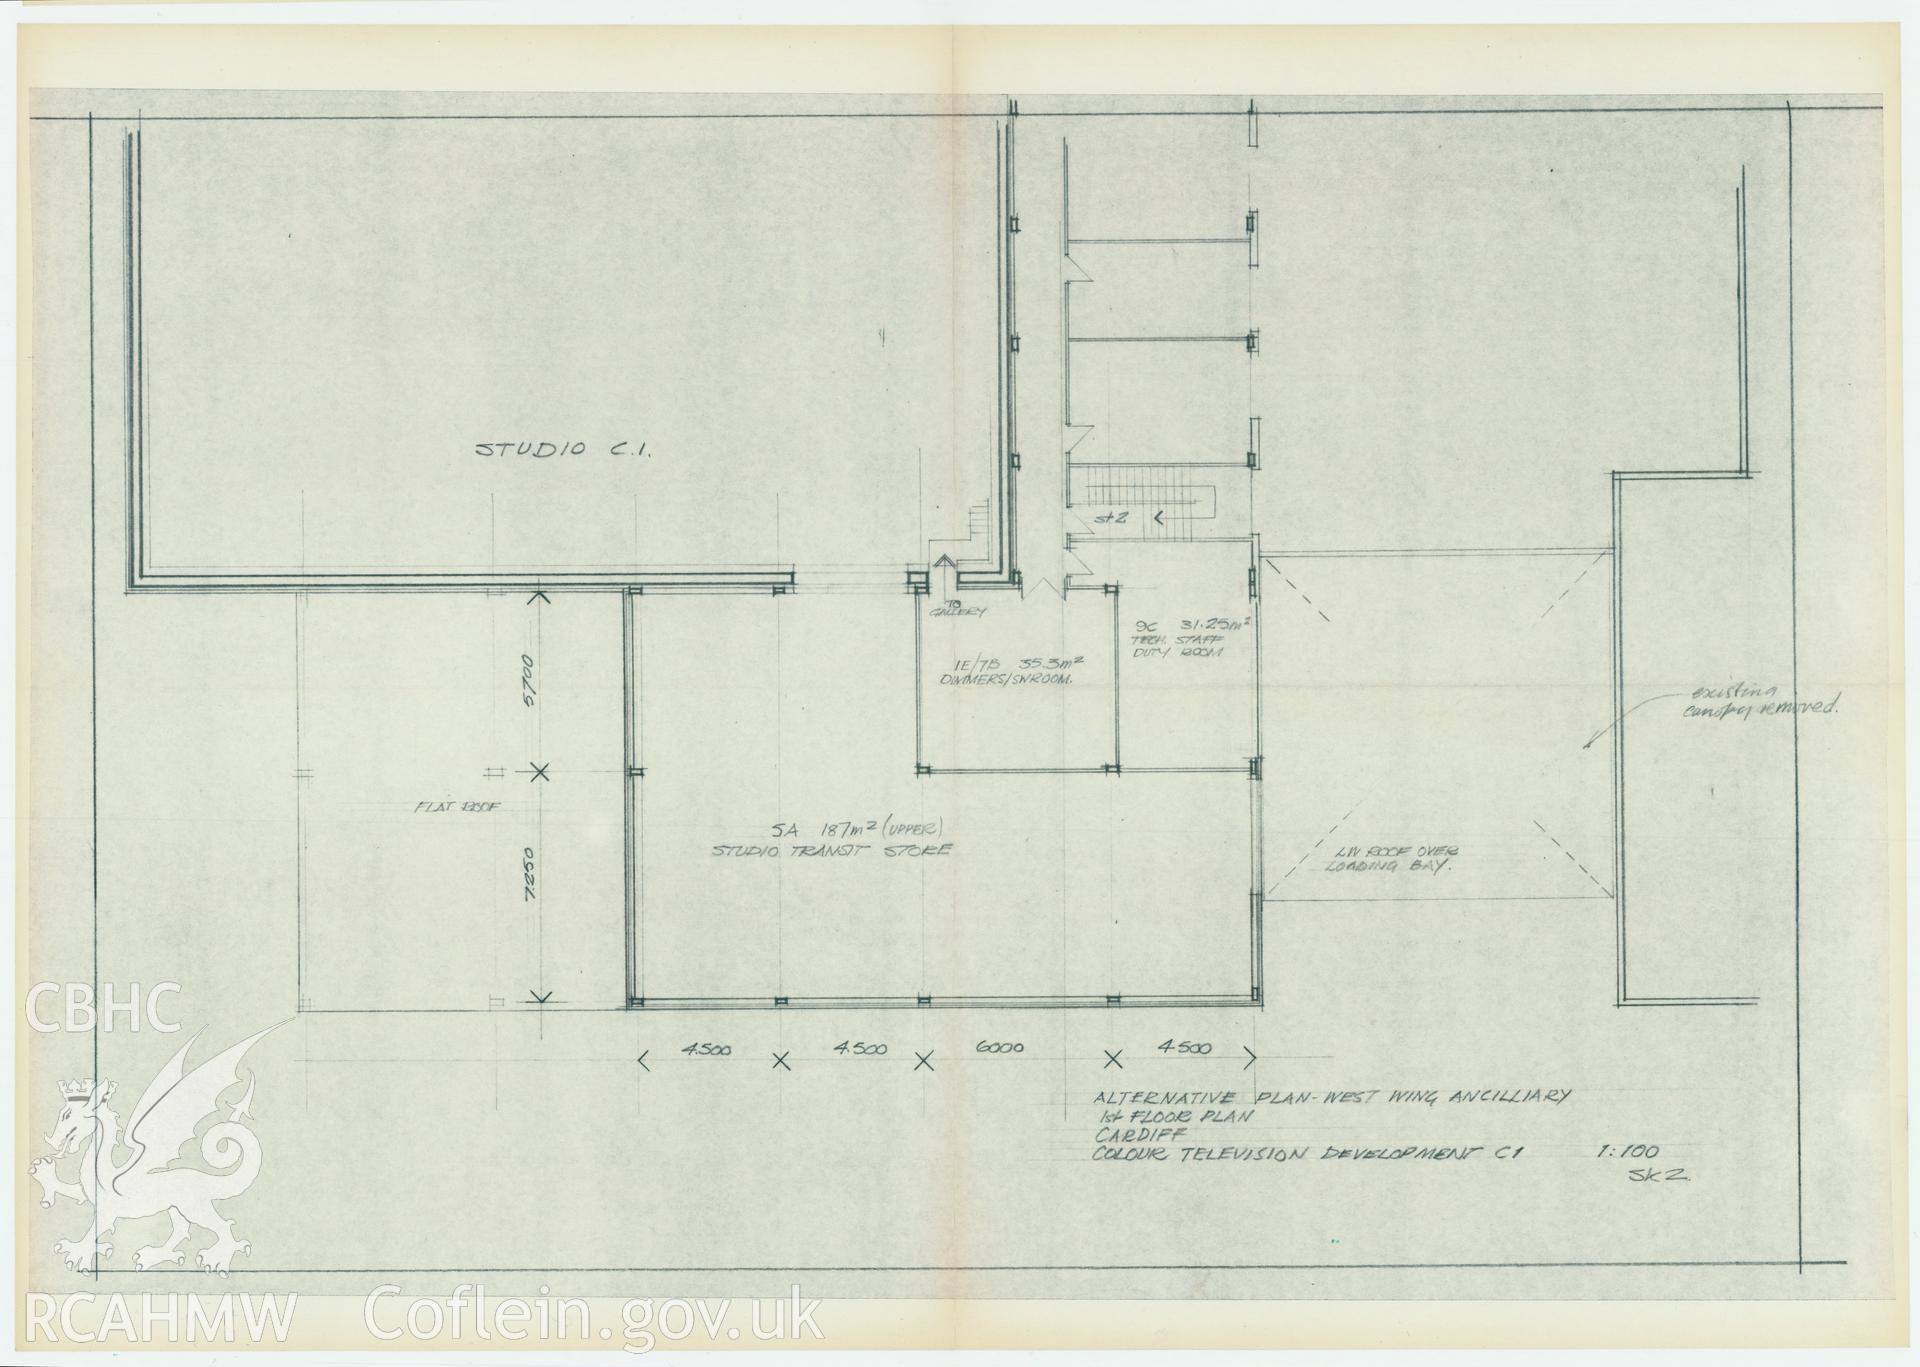 Digitised drawing plan of Llandaff production studio C1 Colour TV Development - first floor plan of the west wing ancillary unit. Drawing no. SK2. May 1974.